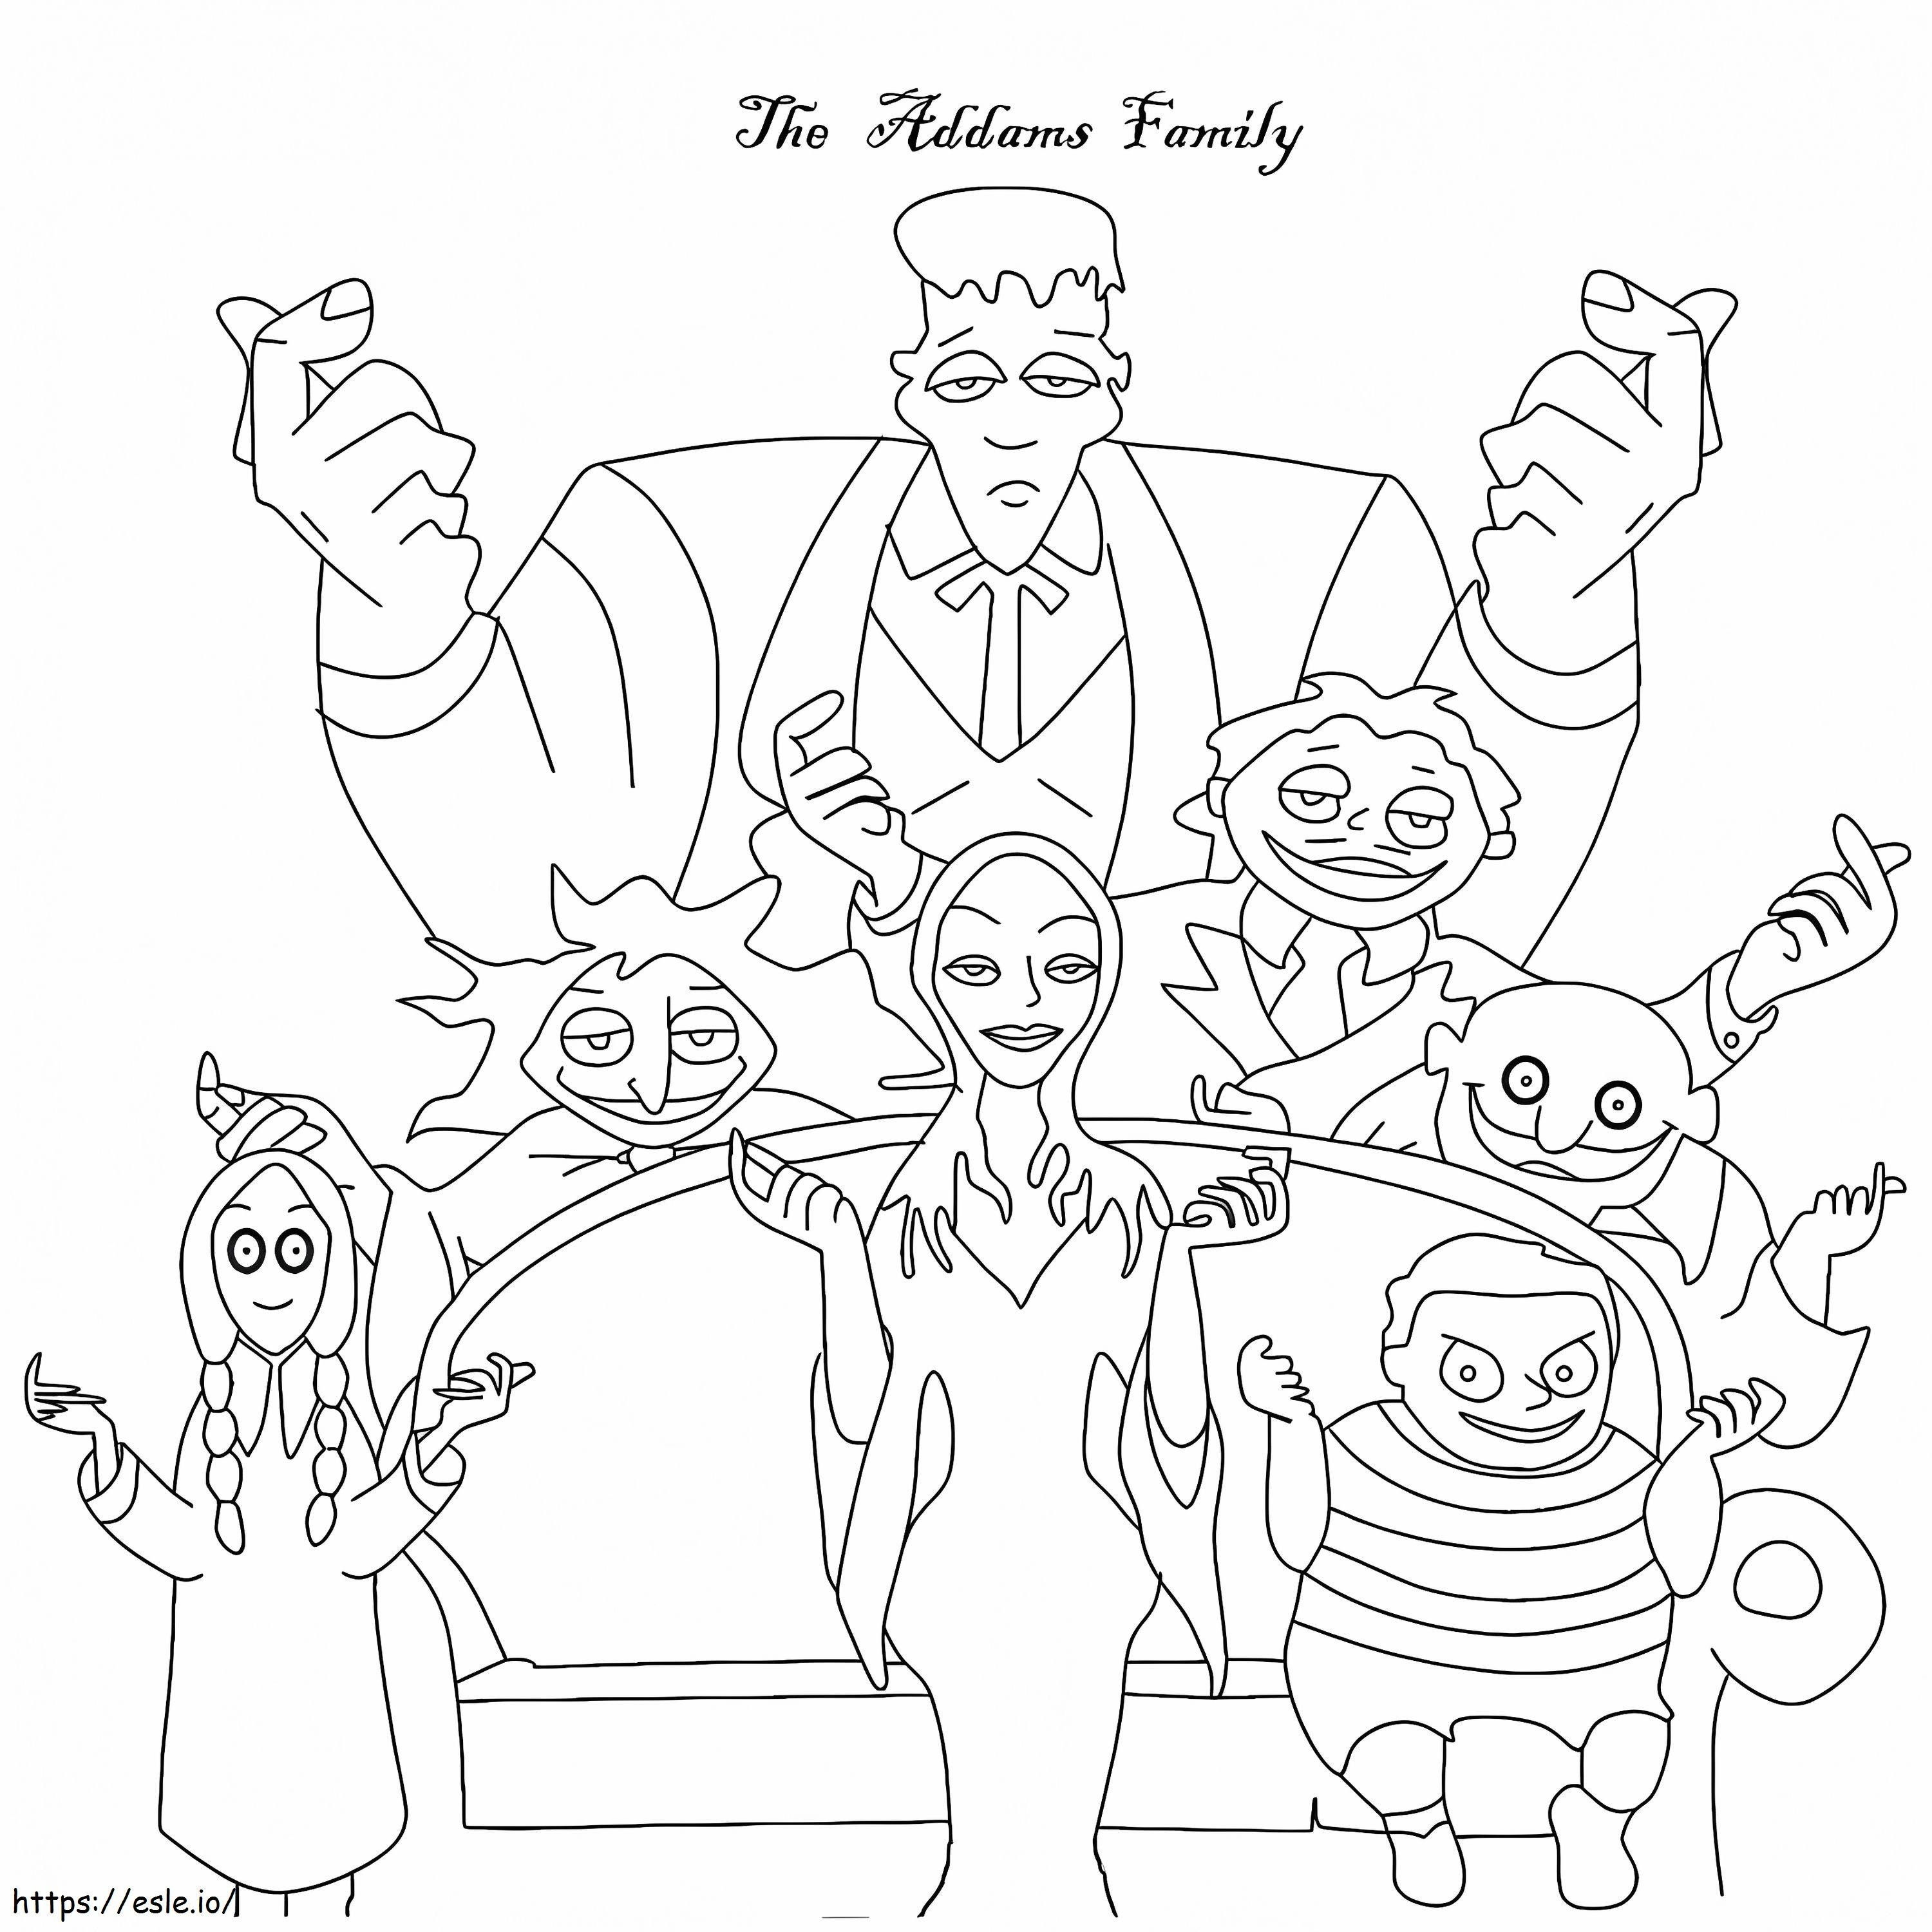 The Addams Family 6 coloring page